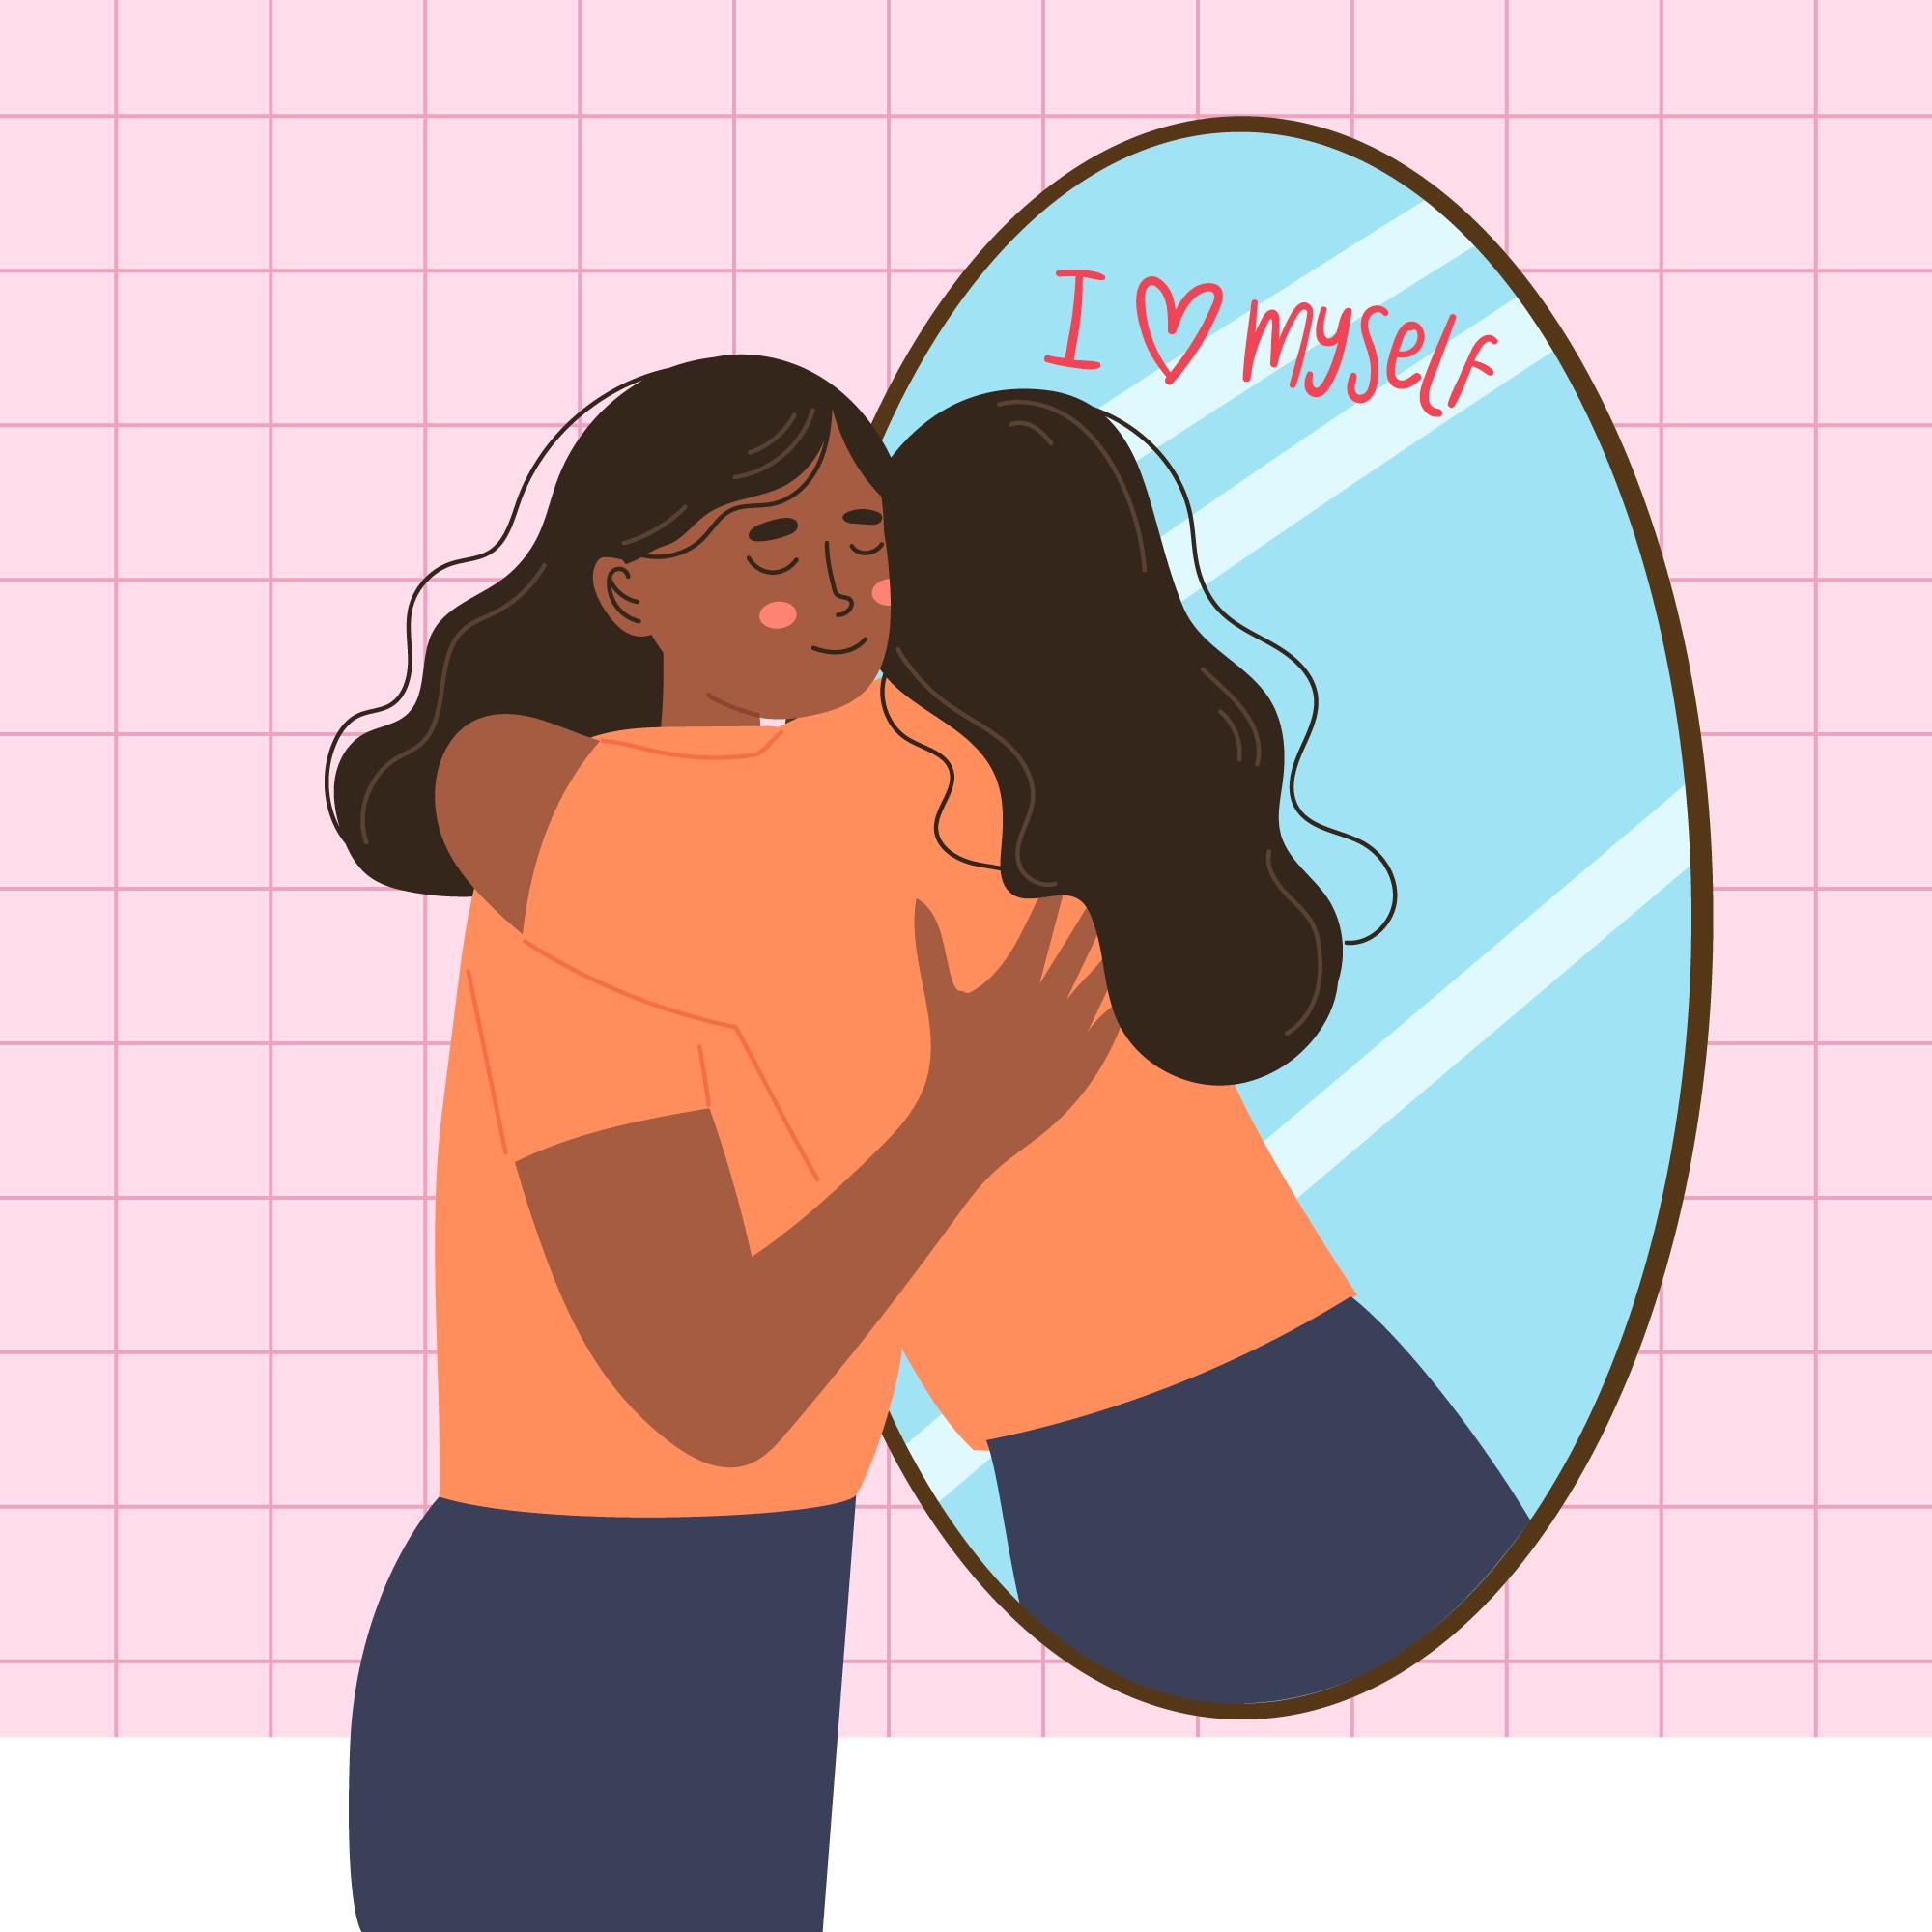 Embracing Self-Love: The Courageous Journey of Acceptance